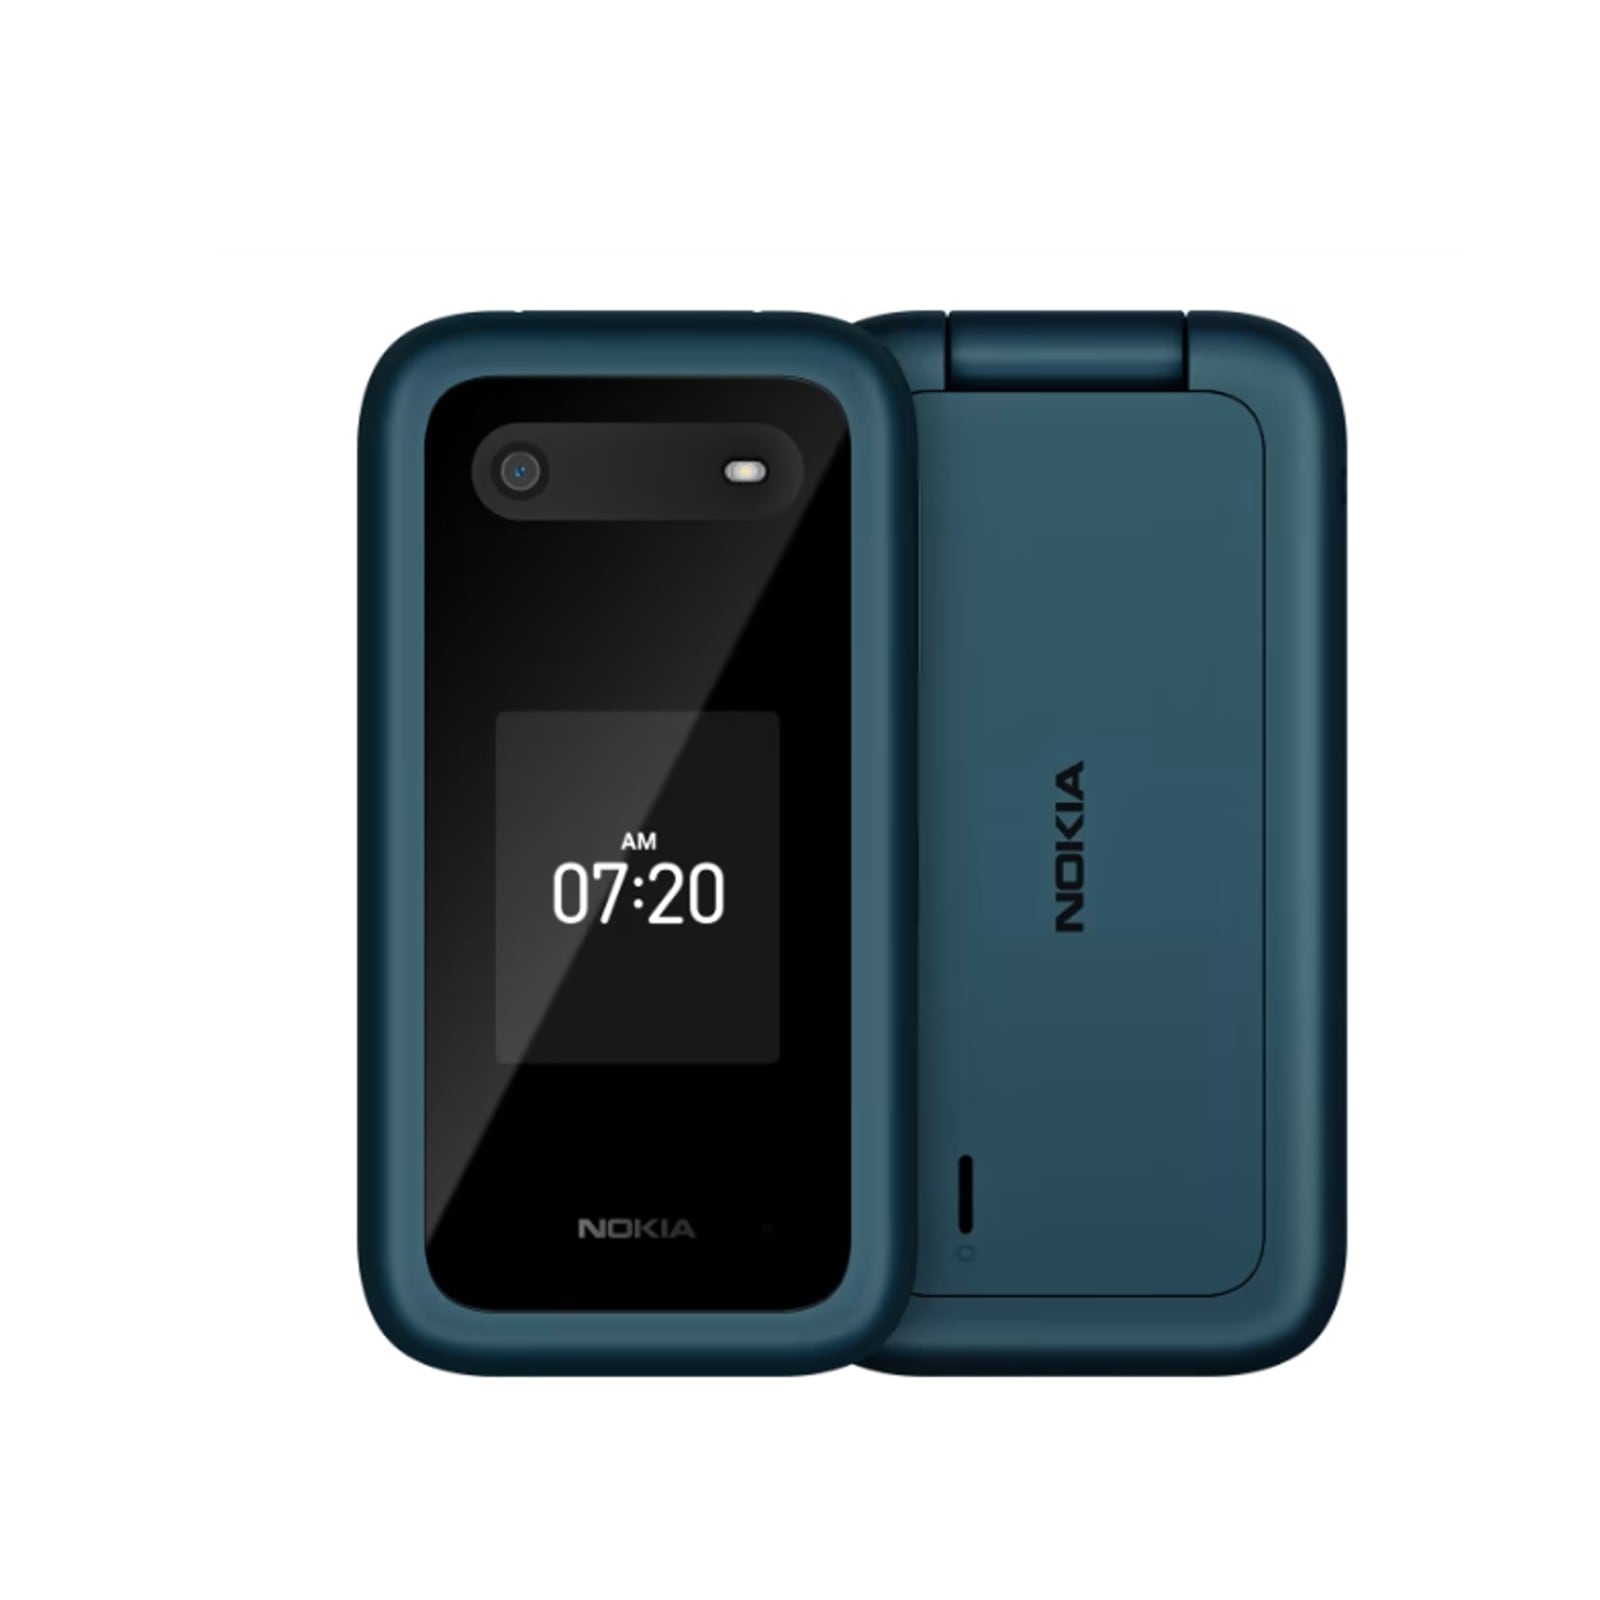 Nokia 2780 Flip Phone With Support For WhatsApp And USB C Charging  Launched: Price, Features - News18